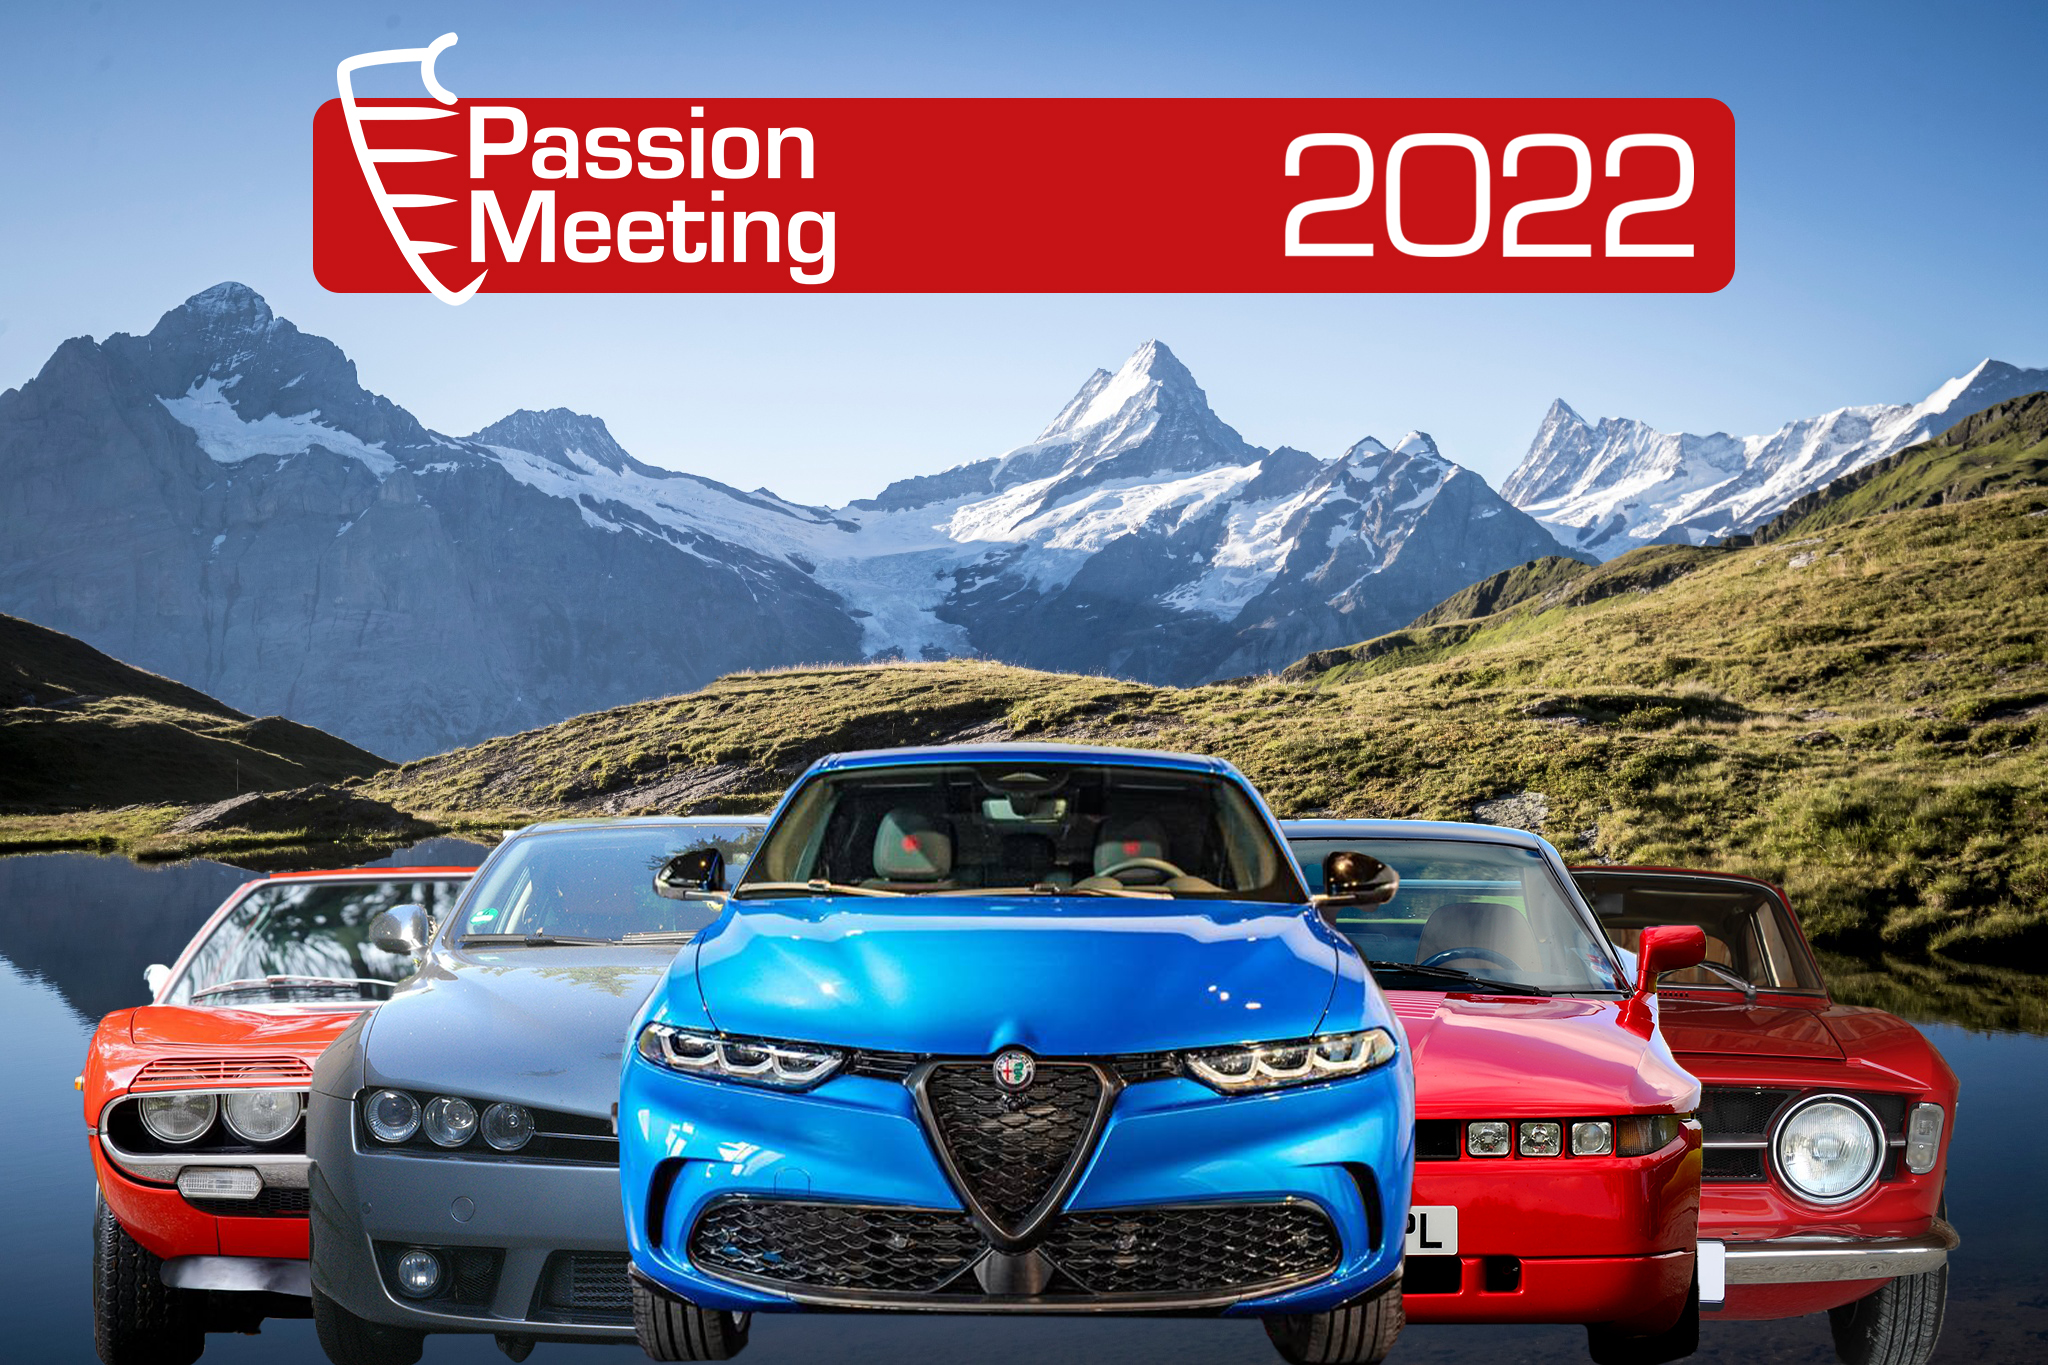 Passion Meeting 2022